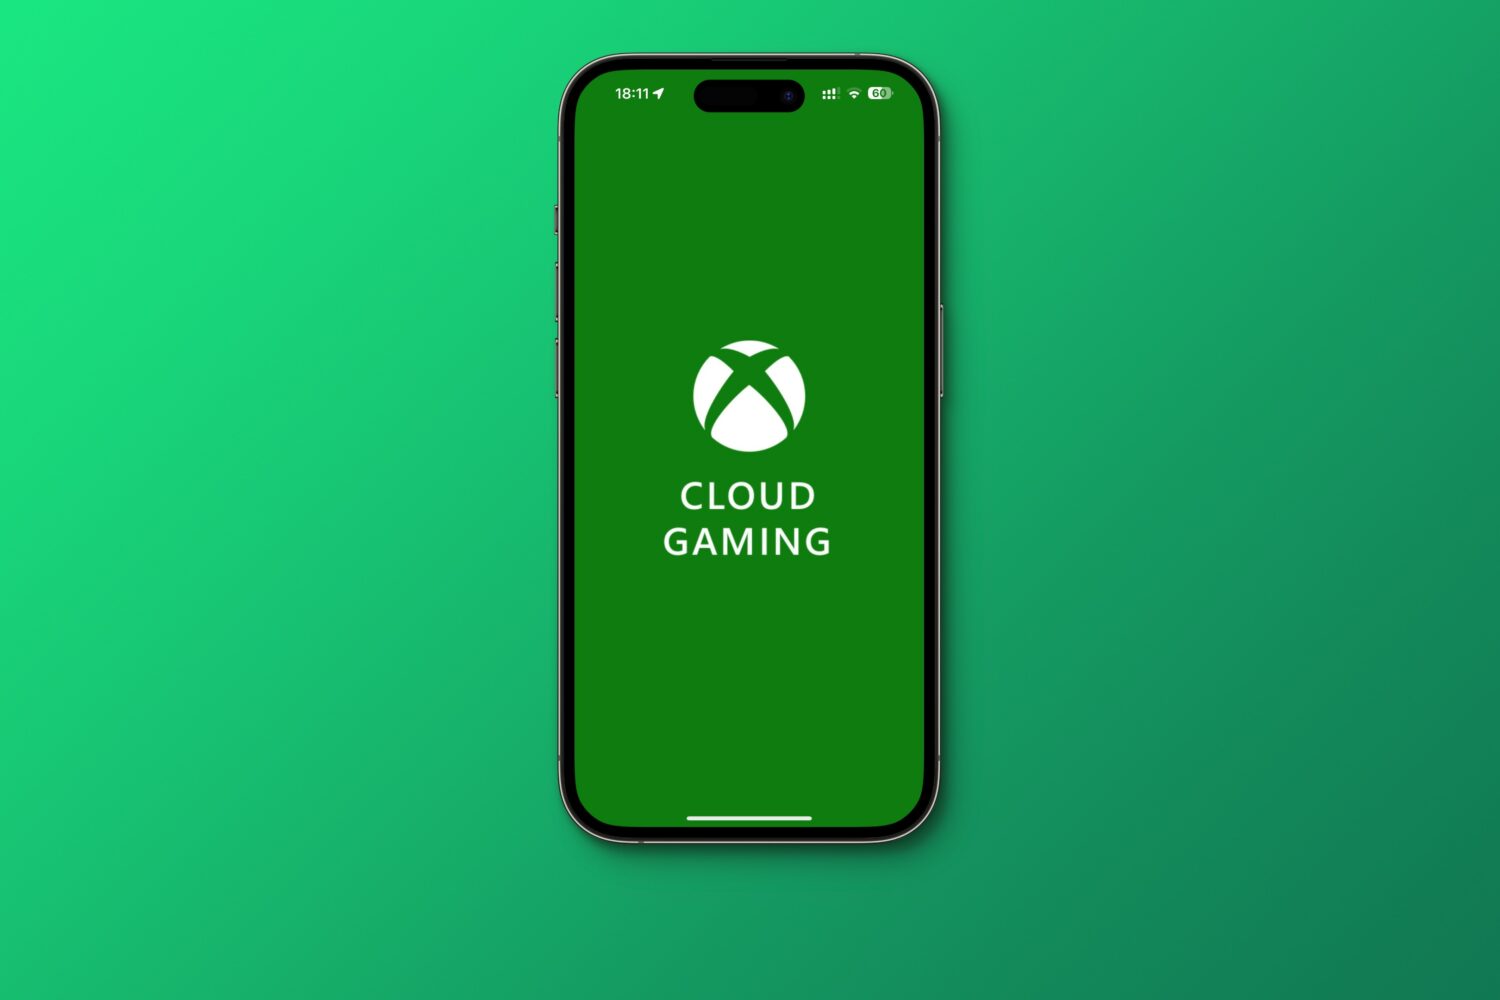 iPhone displaying the Xbox cloud gaming logo on a gradient green background